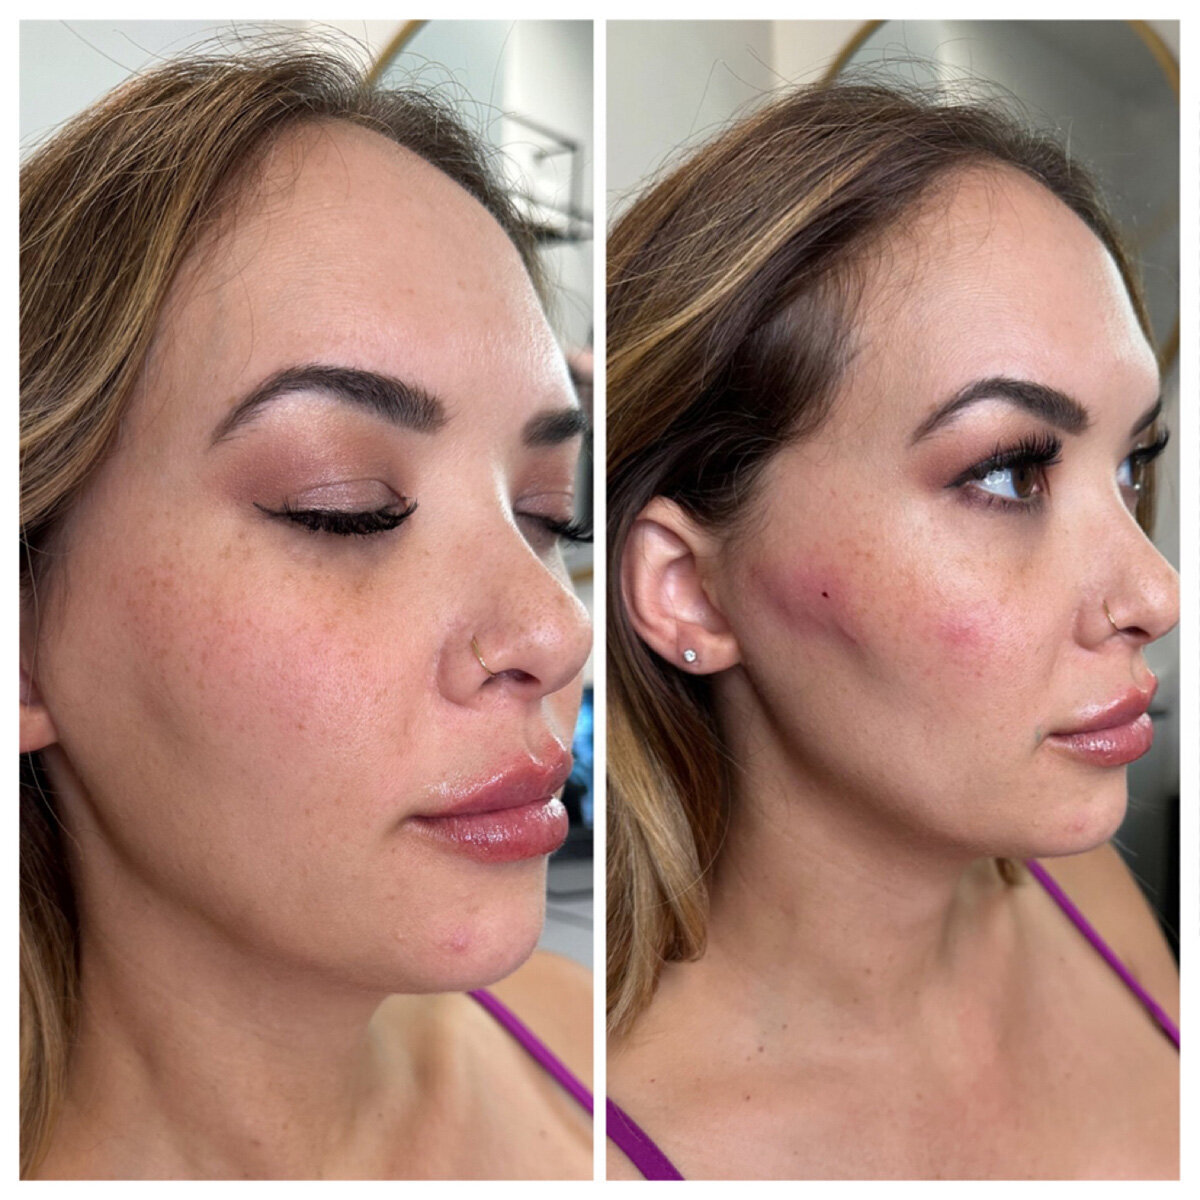 W Aesthetics Dermal Fillers Before and After. Austin Texas 2